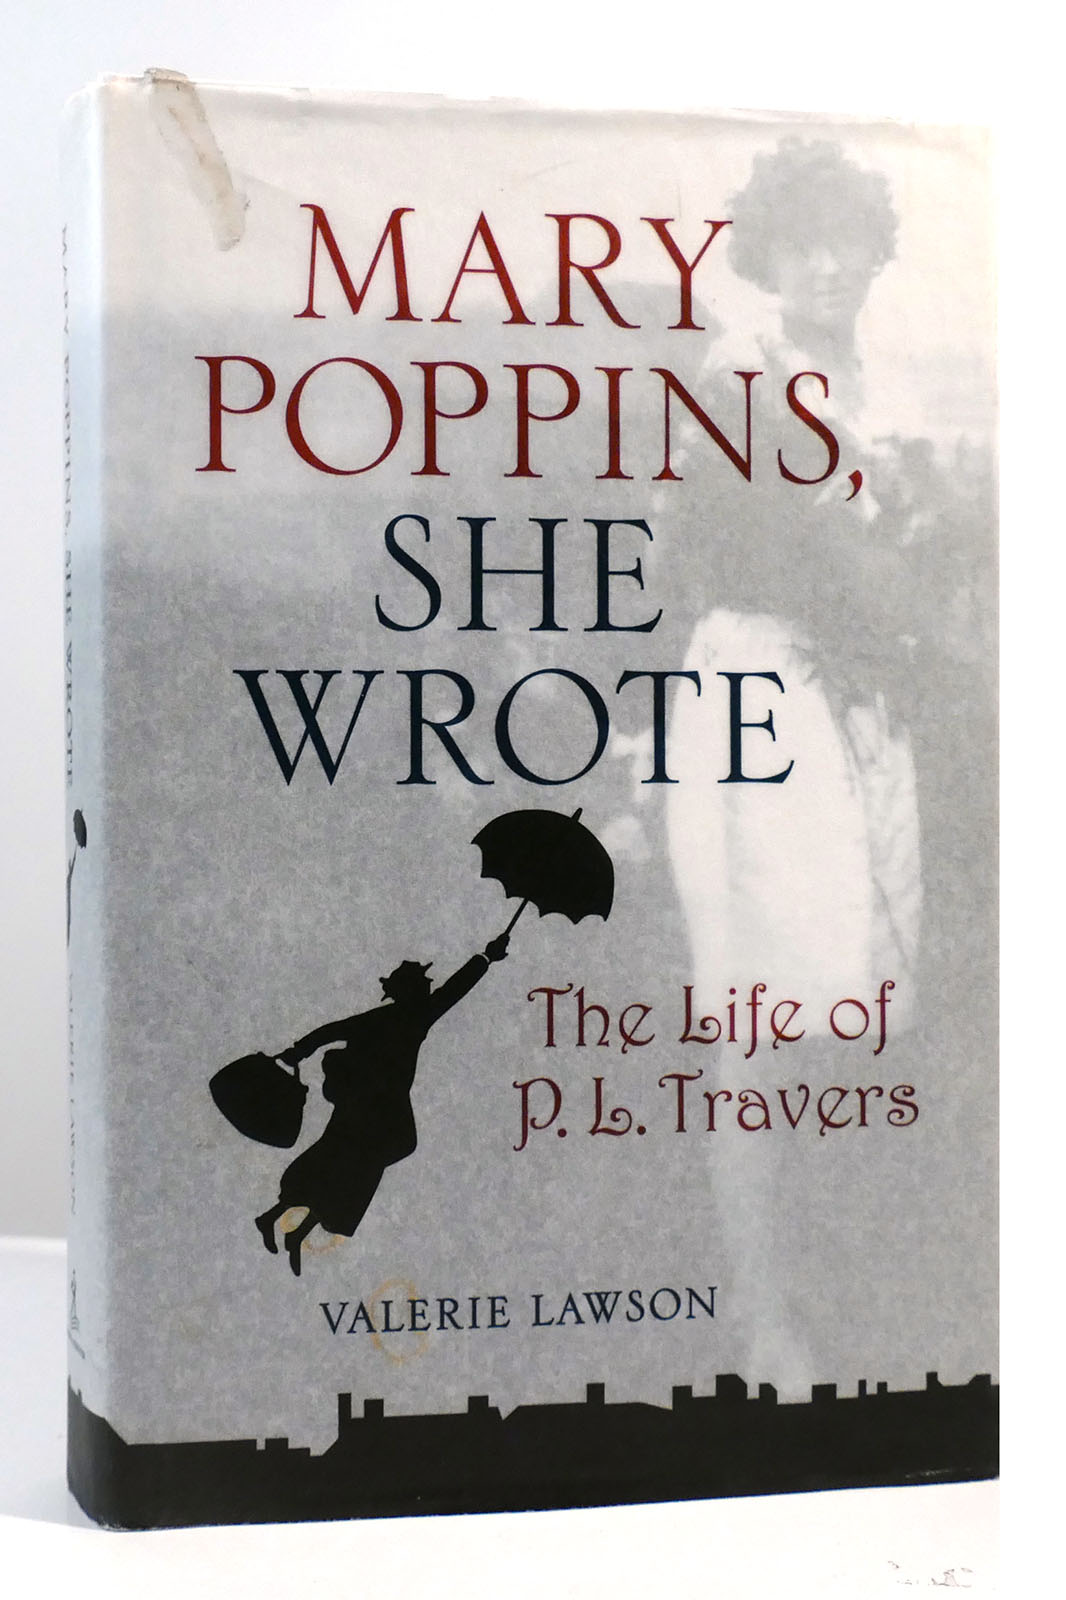 MARY POPPINS, SHE WROTE The Life of P. L. Travers - Valerie Lawson